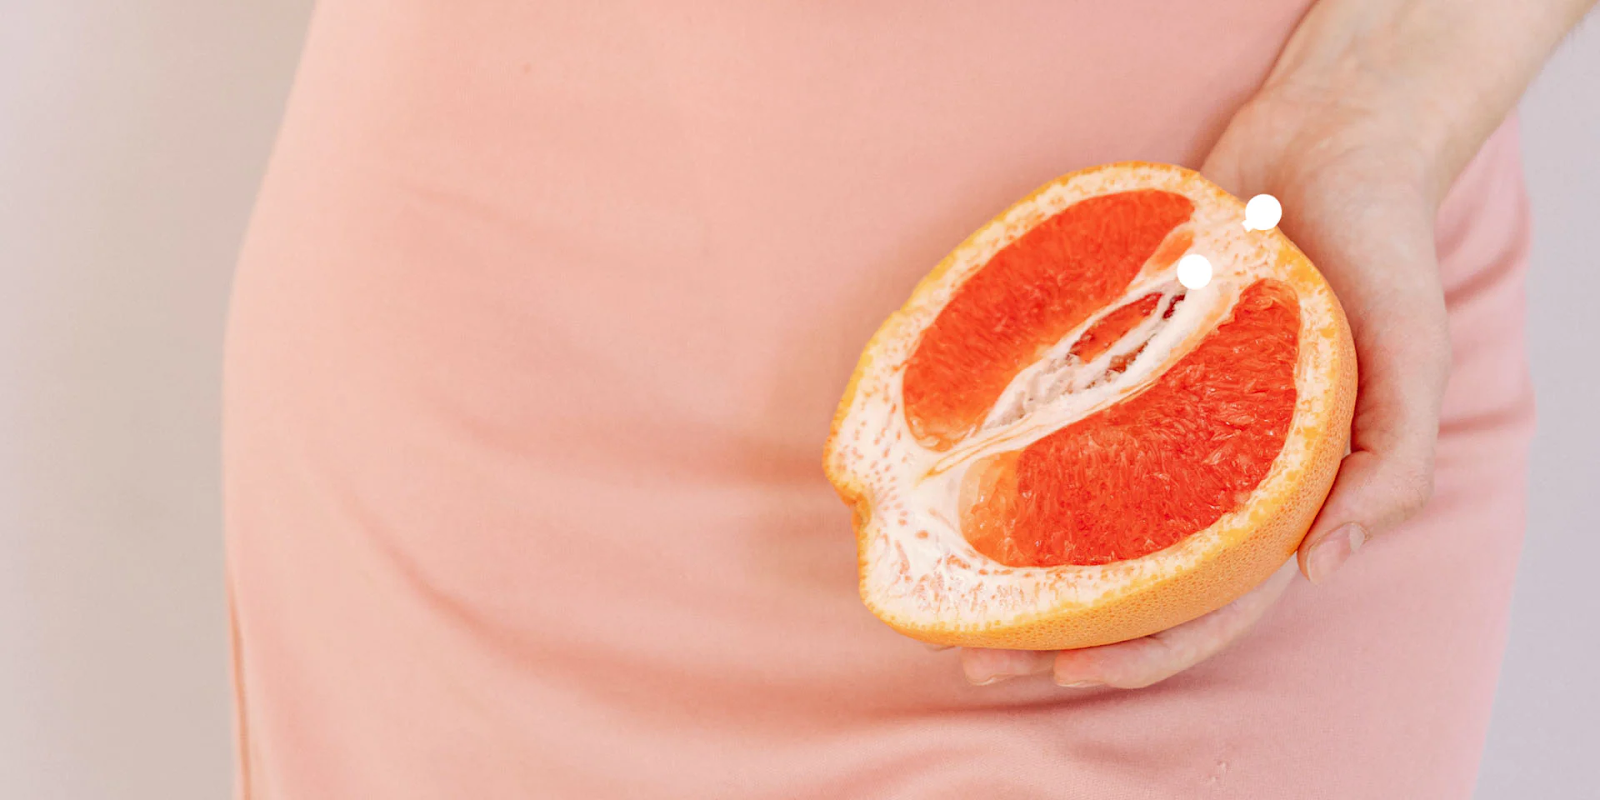 Picture of a lady holding a symbolical orange that resembles women's lady parts